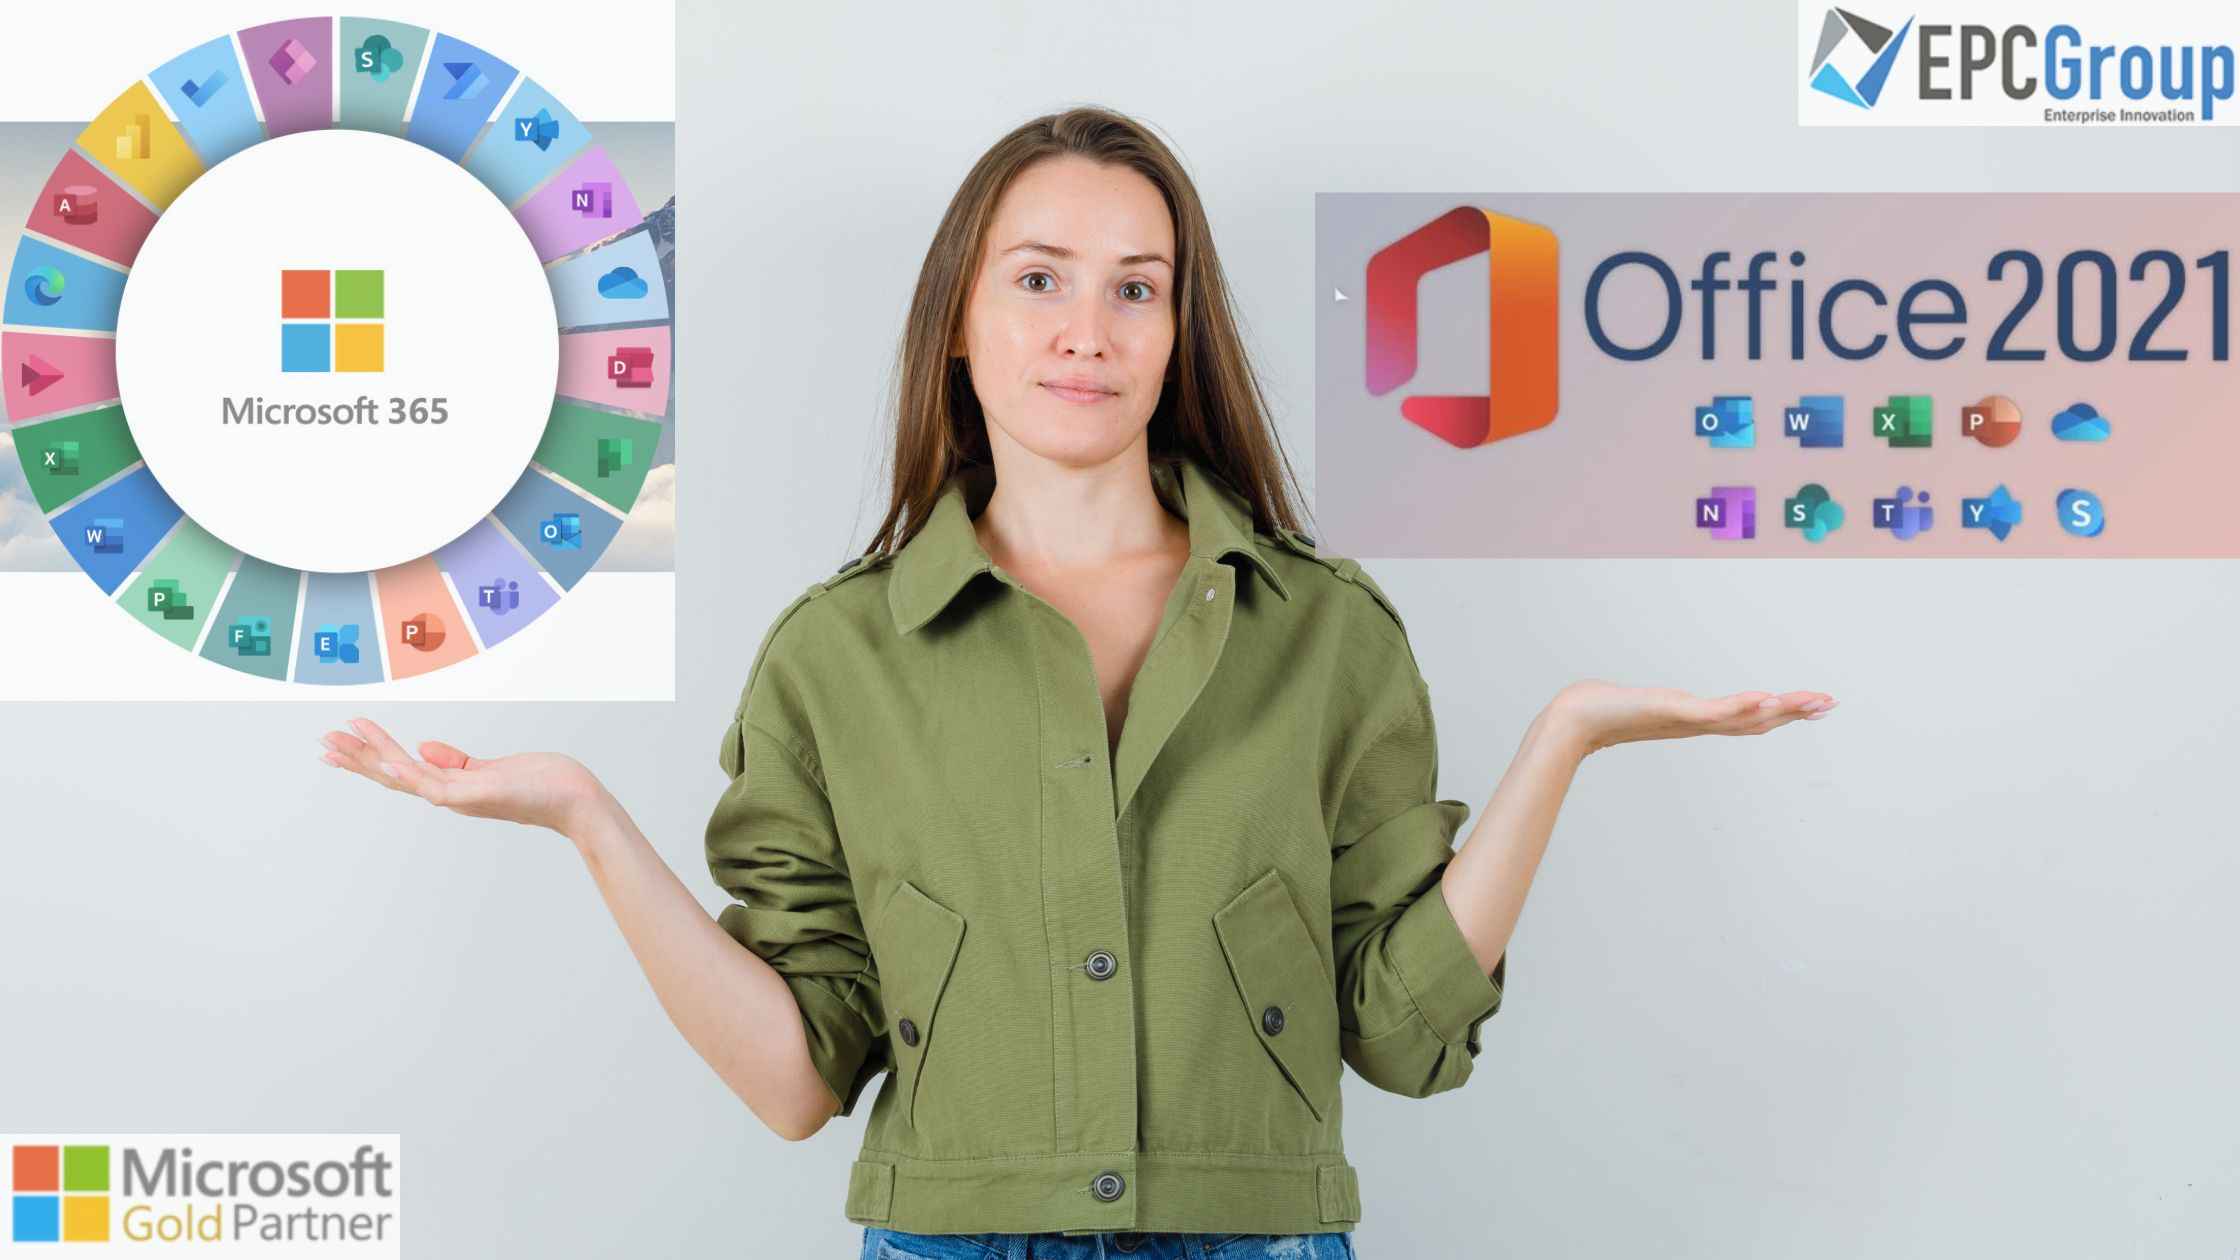 Microsoft 365 vs. Office 2021: How To Choose The Right Product? - thumb image